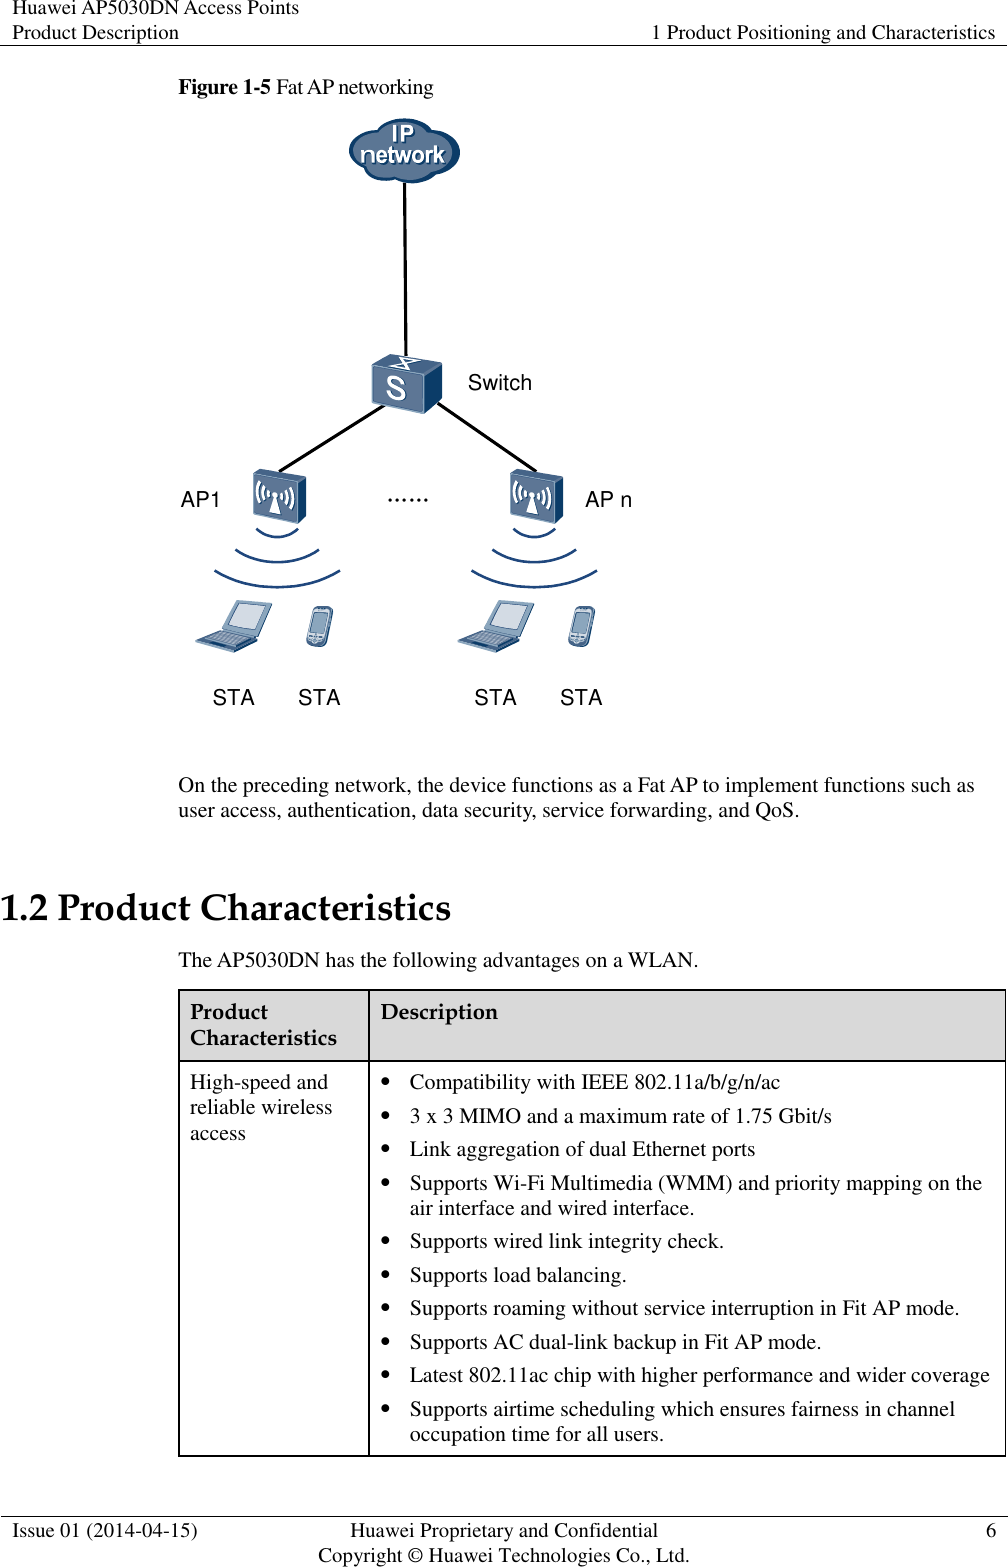 Huawei AP5030DN Access Points Product Description 1 Product Positioning and Characteristics  Issue 01 (2014-04-15) Huawei Proprietary and Confidential                                     Copyright © Huawei Technologies Co., Ltd. 6  Figure 1-5 Fat AP networking AP nAP1 ……SwitchSTA STASTA STA  On the preceding network, the device functions as a Fat AP to implement functions such as user access, authentication, data security, service forwarding, and QoS.   1.2 Product Characteristics The AP5030DN has the following advantages on a WLAN. Product Characteristics Description High-speed and reliable wireless access  Compatibility with IEEE 802.11a/b/g/n/ac  3 x 3 MIMO and a maximum rate of 1.75 Gbit/s  Link aggregation of dual Ethernet ports  Supports Wi-Fi Multimedia (WMM) and priority mapping on the air interface and wired interface.  Supports wired link integrity check.  Supports load balancing.  Supports roaming without service interruption in Fit AP mode.  Supports AC dual-link backup in Fit AP mode.  Latest 802.11ac chip with higher performance and wider coverage  Supports airtime scheduling which ensures fairness in channel occupation time for all users. 